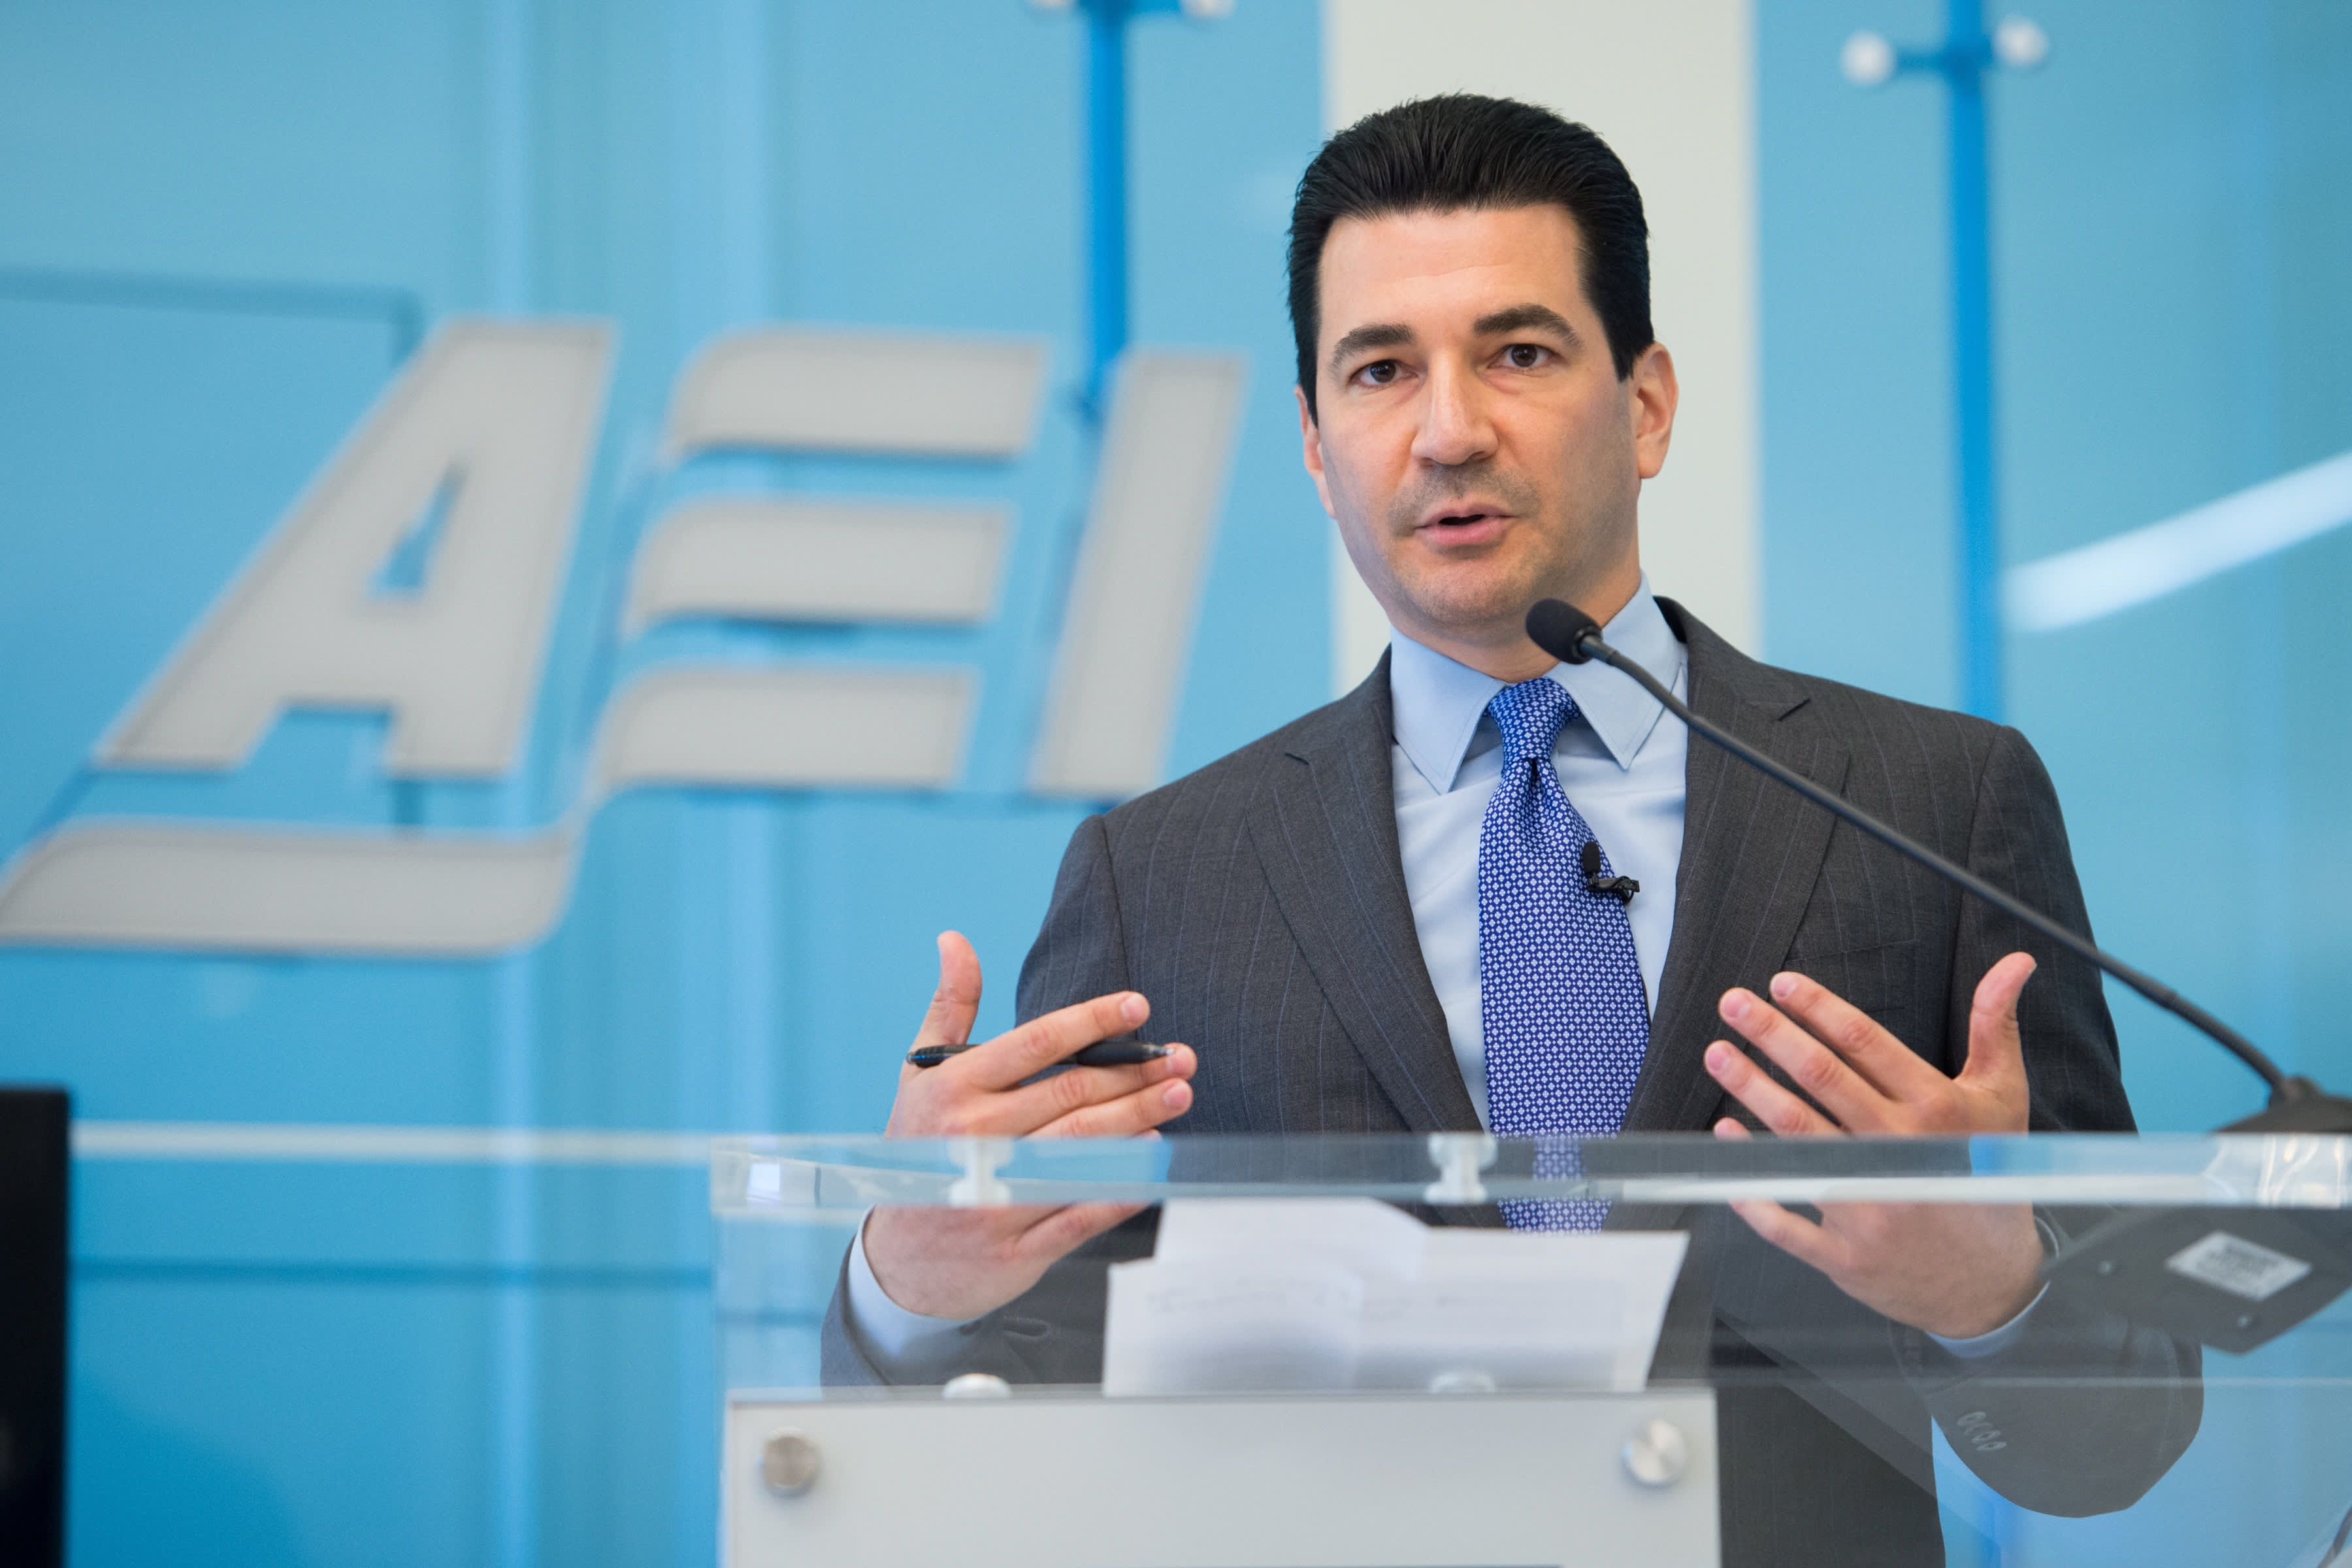 The South African variant of Covid appears to “avoid” antibody drugs, says Dr. Scott Gottlieb